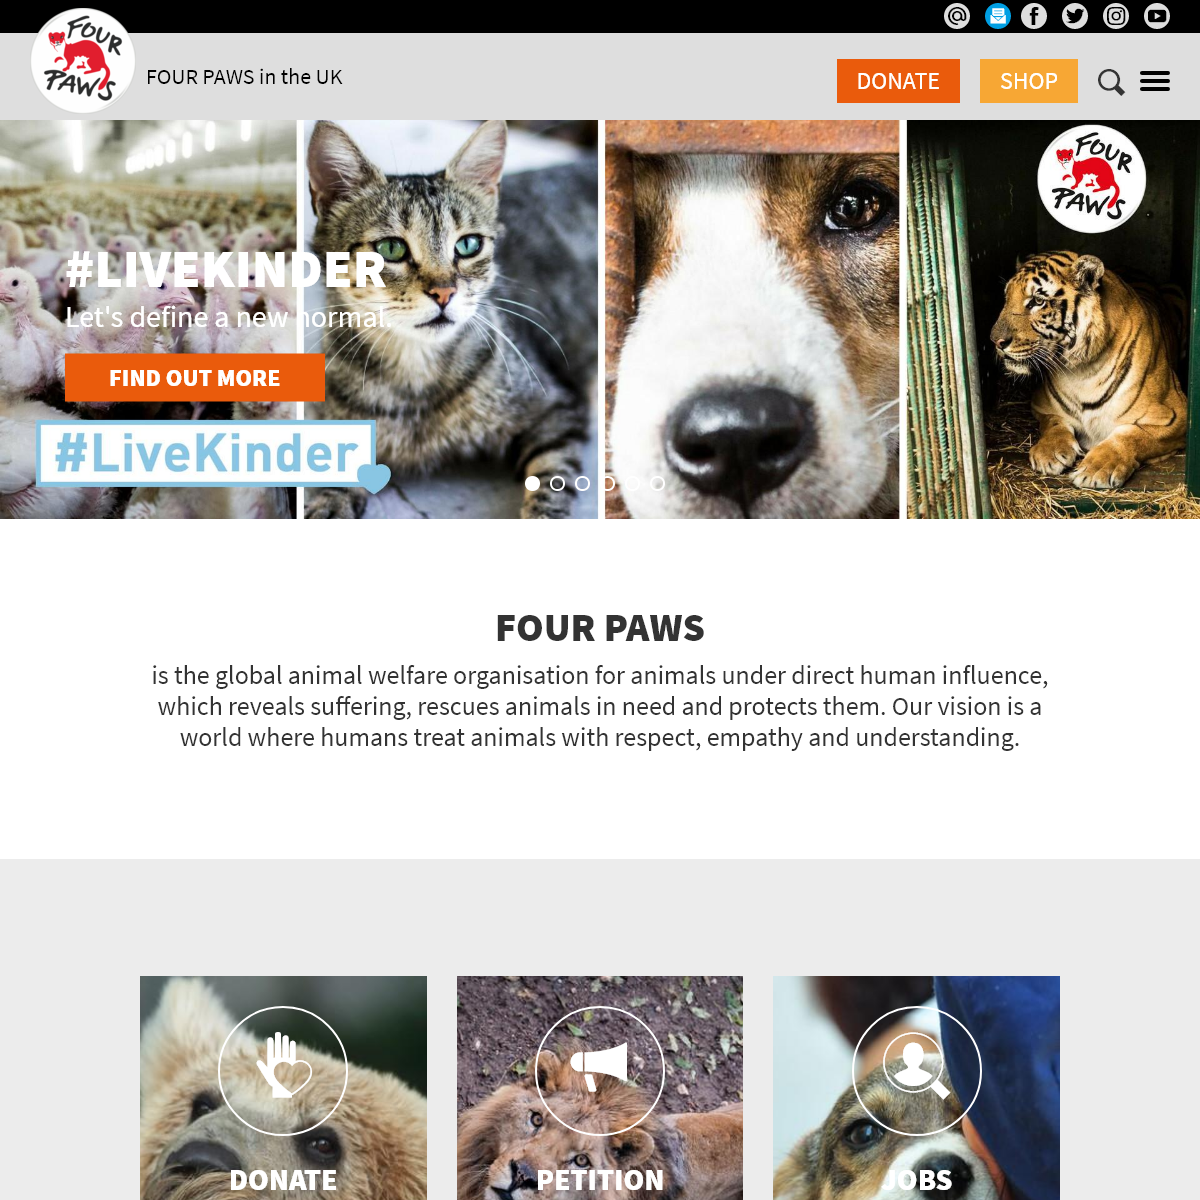 A complete backup of four-paws.org.uk